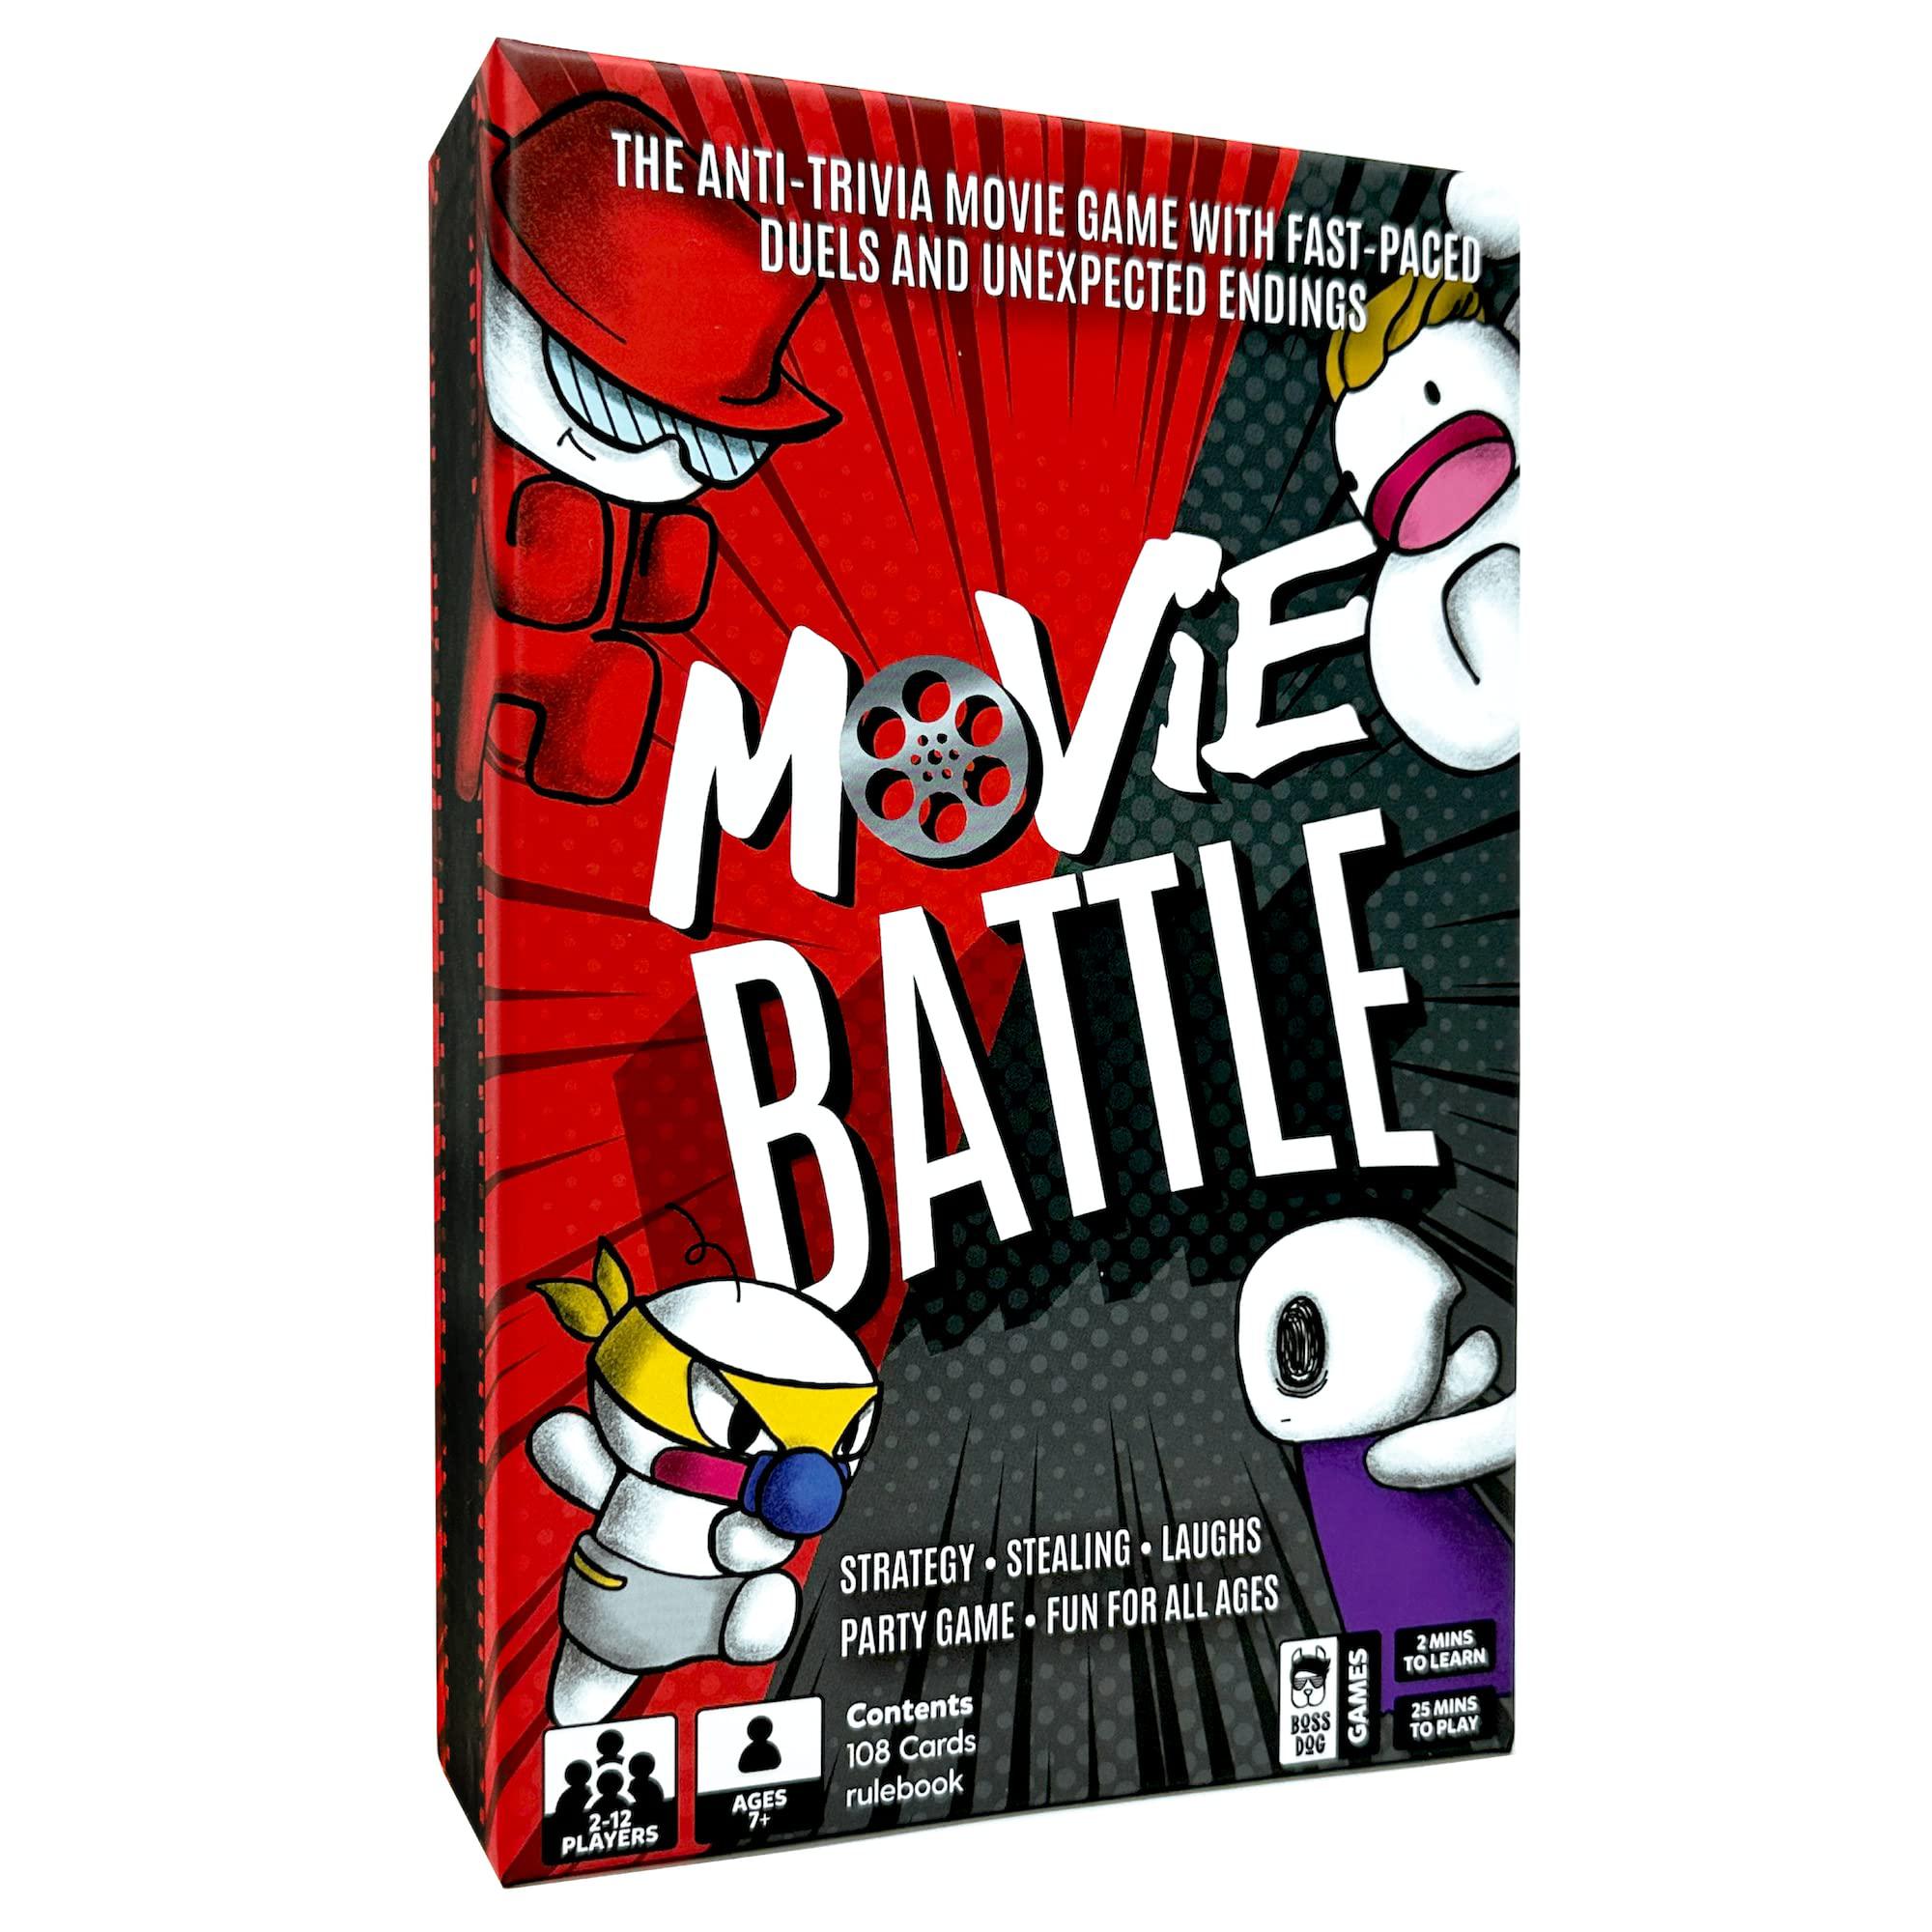 BOSS DOG GAMES boss dogs movie battle game: the anti-trivia movie game with fast paced duels and unexpected endings - a movie party game for